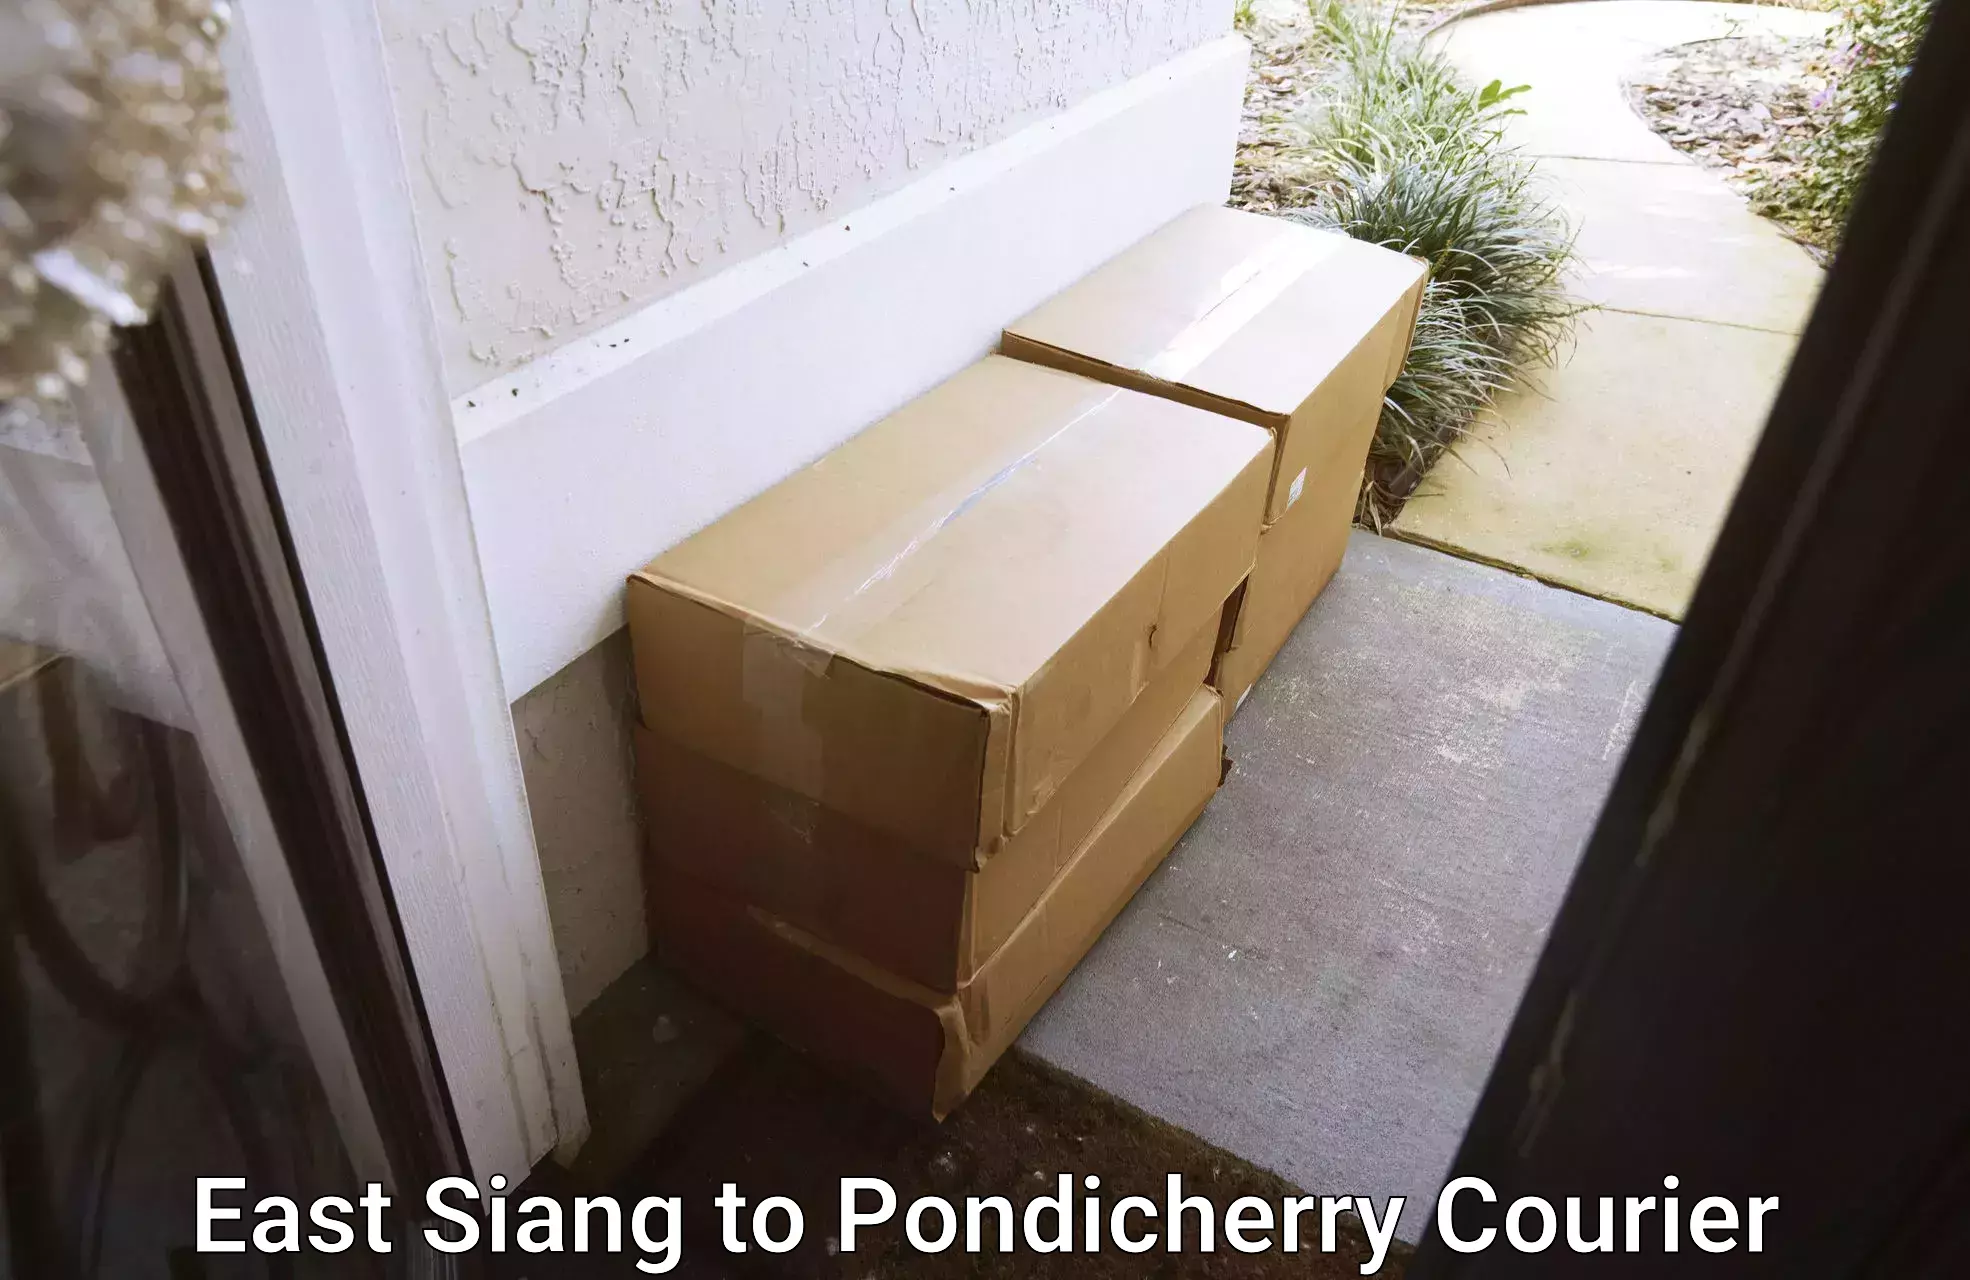 Customer-focused courier East Siang to Pondicherry